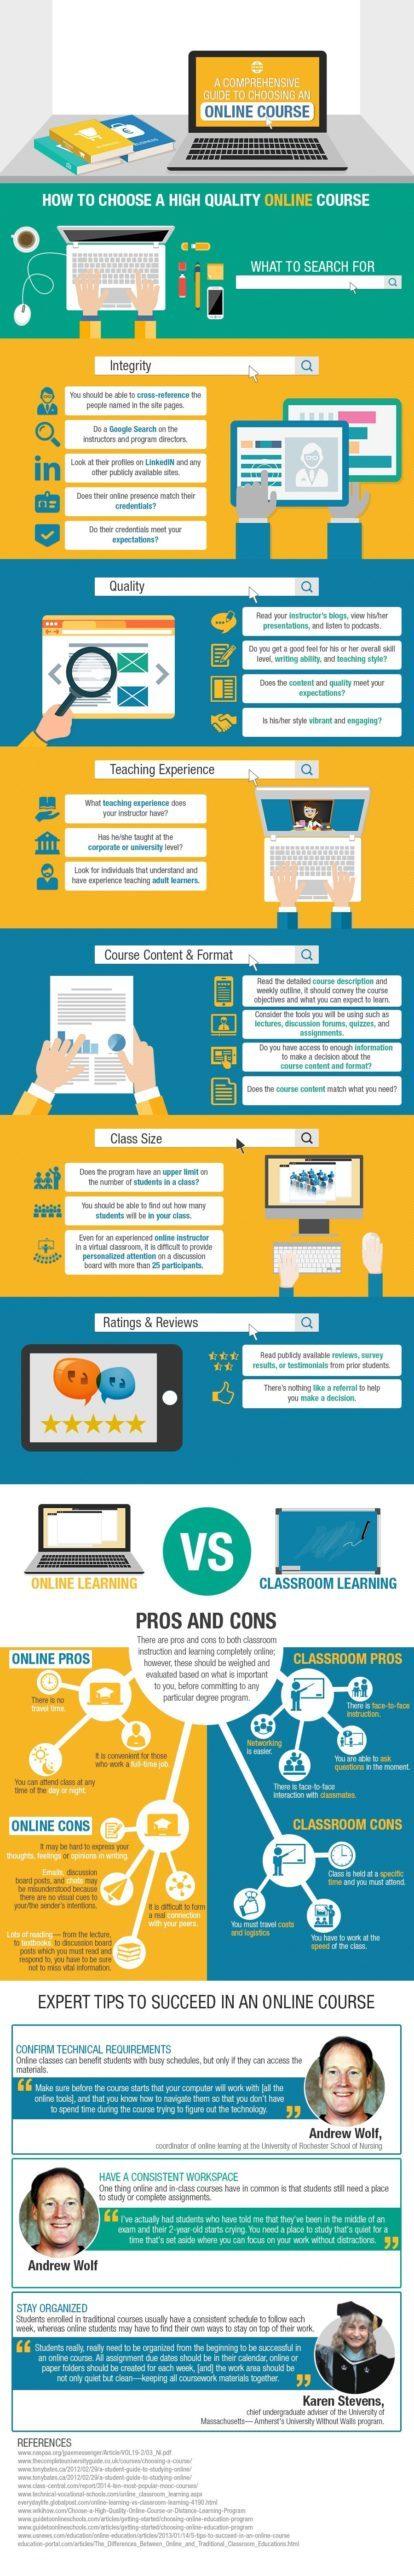 A Comprehensive Guide to Choosing an Online Course [Infographic]